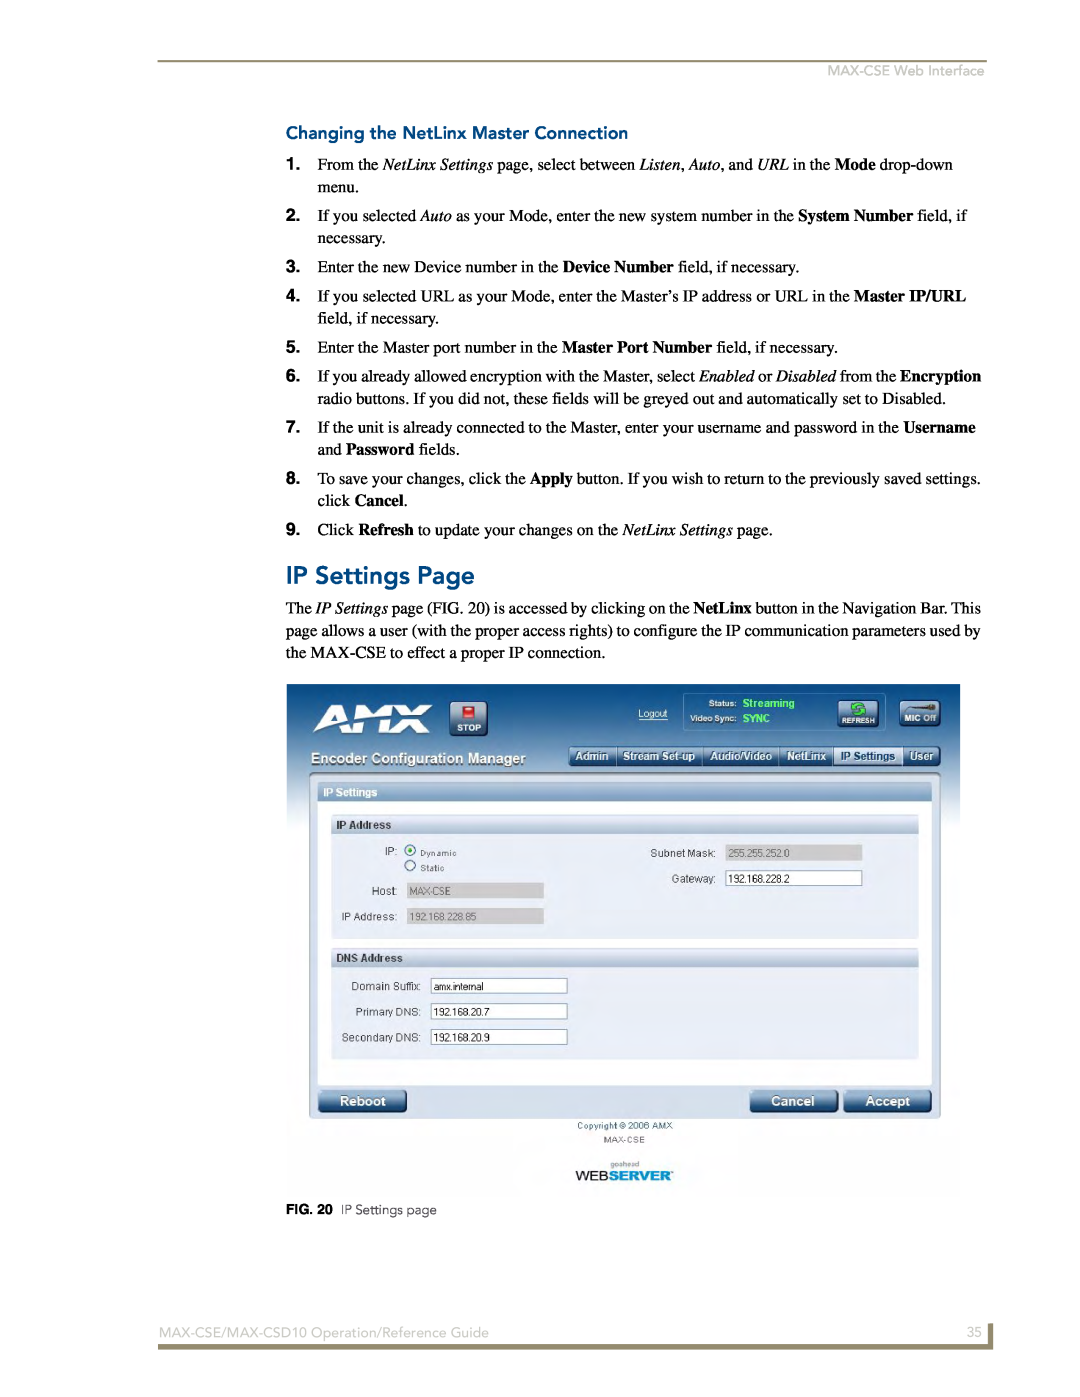 AMX MAX-CSD 10, MAX-CSE manual IP Settings Page, Changing the NetLinx Master Connection 